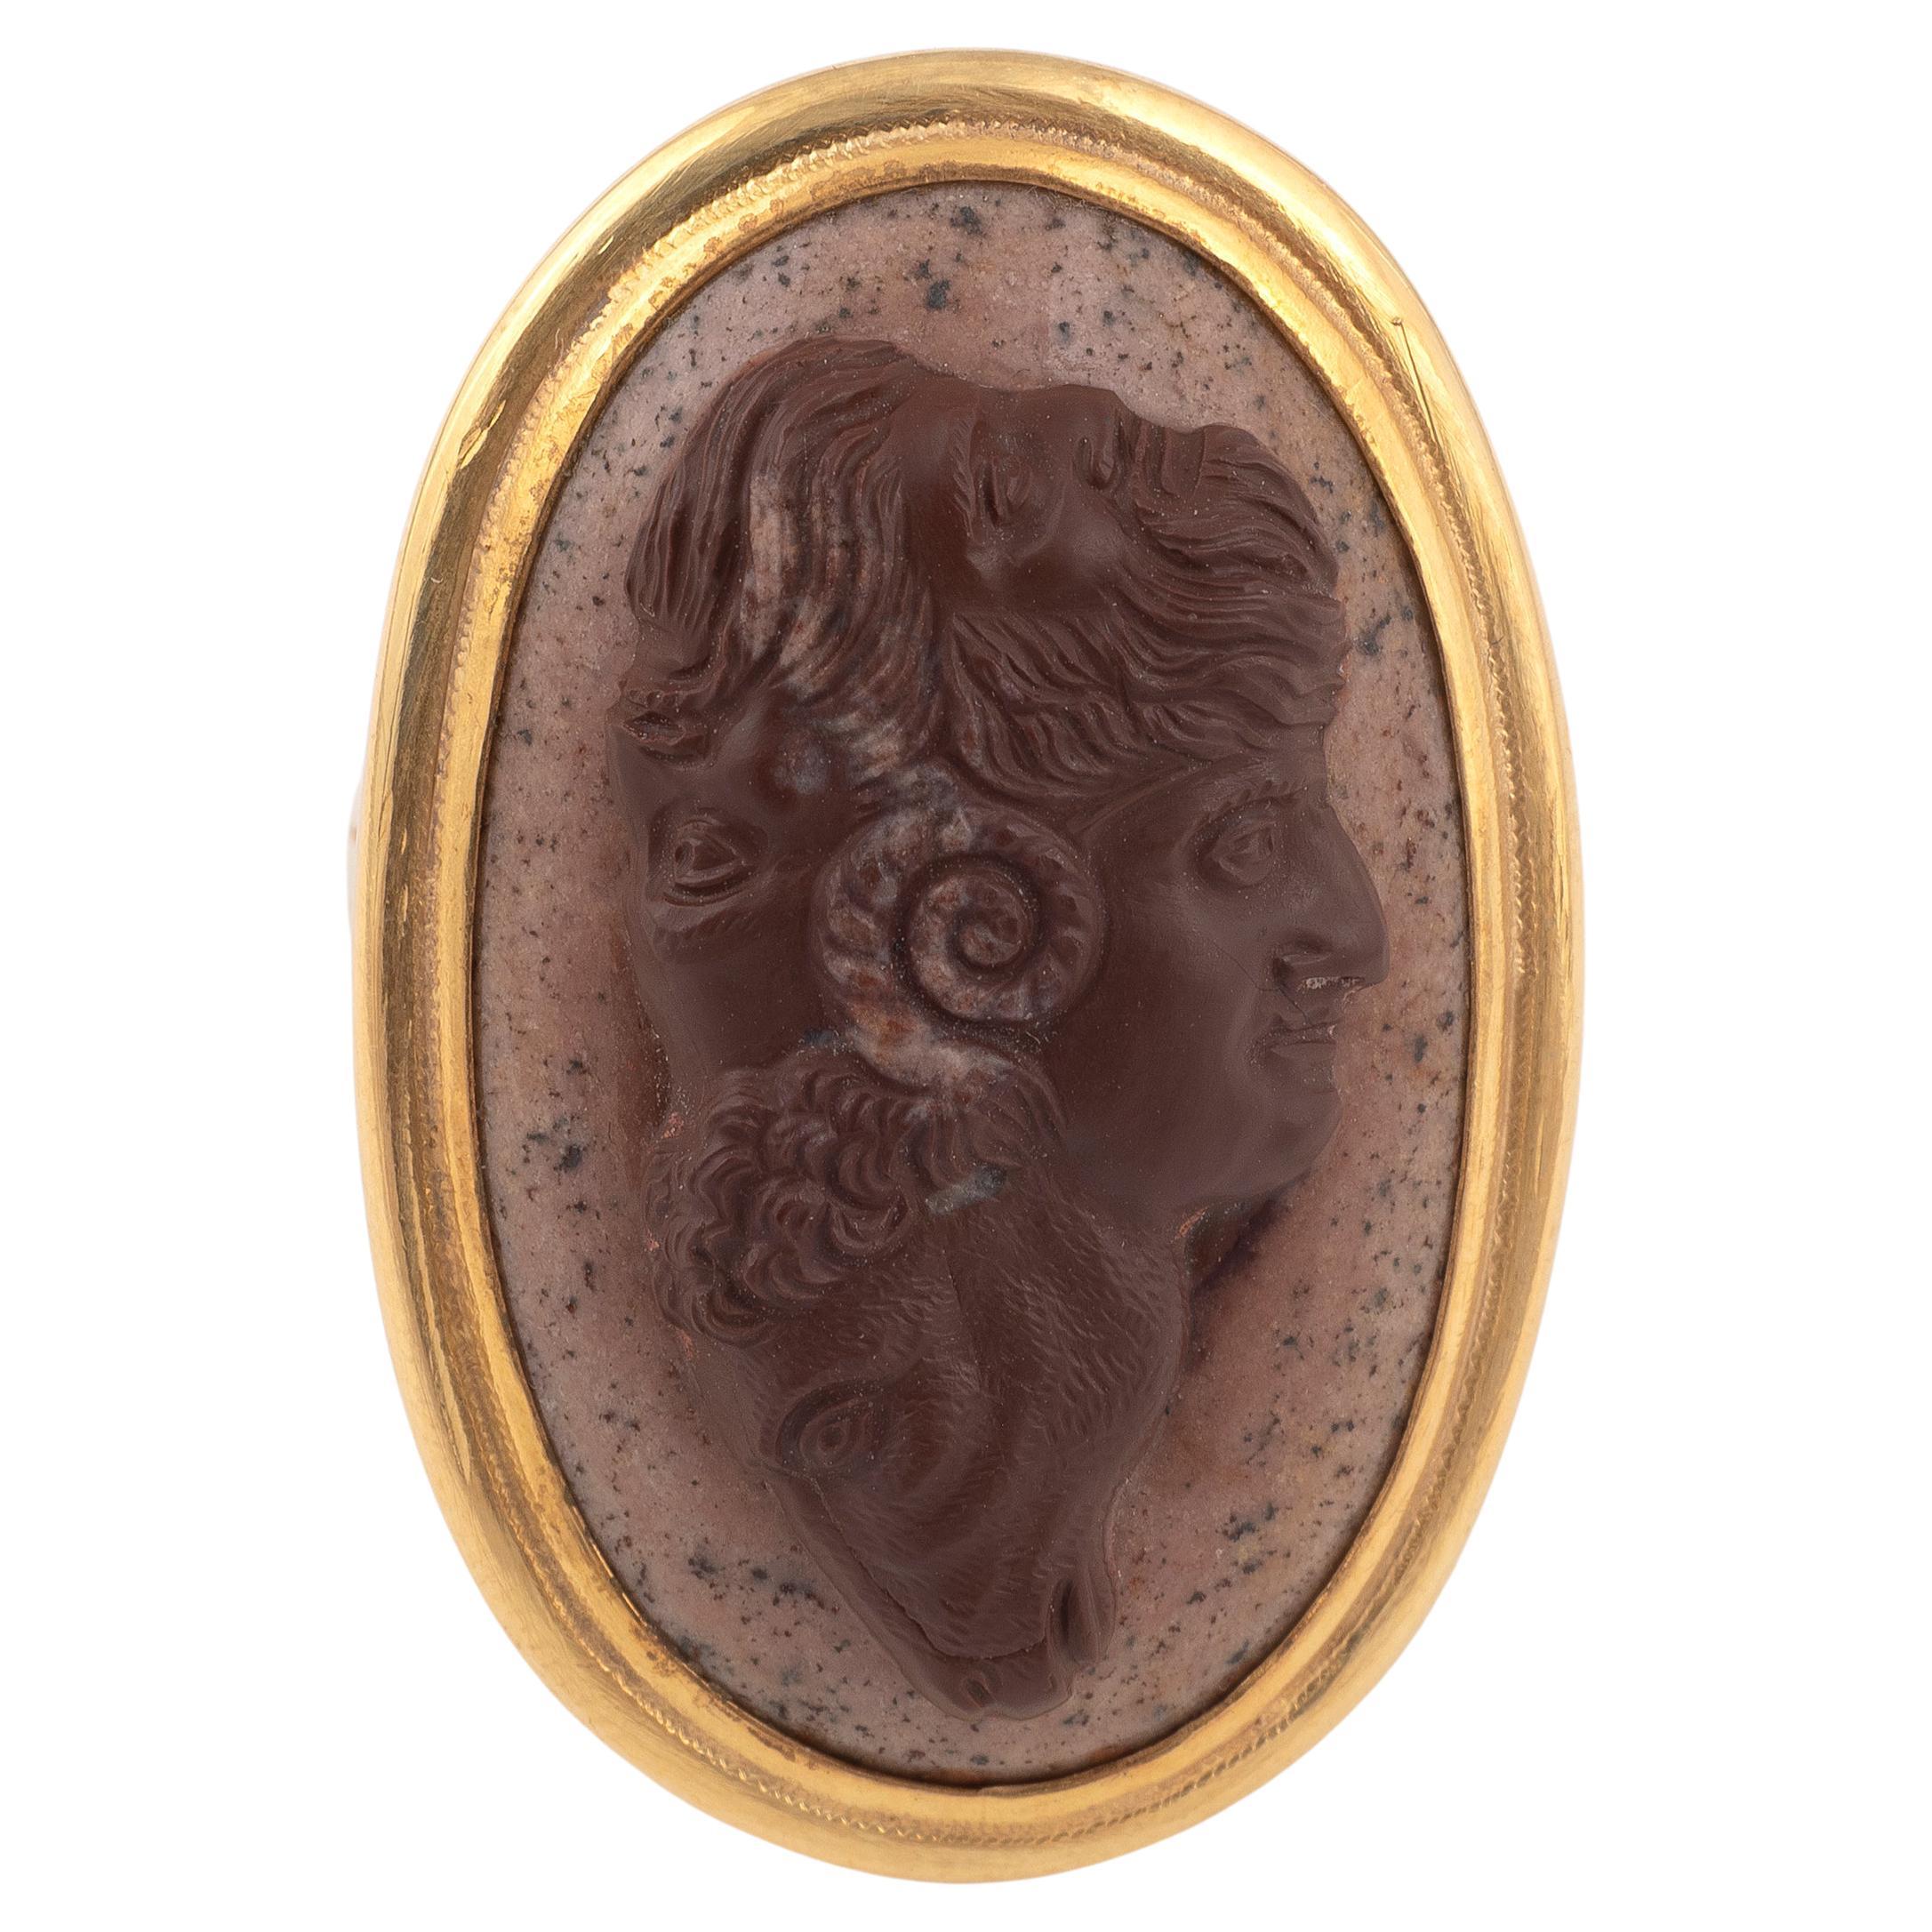 
Oval, depicting four conjoined heads: a male youth, a ram, a satyr and a bearded man, within a gold mount, ring size 7 length 23mm, width 14mm
A gryllus is a group of conjoined heads, usually fanciful combinations of beasts and humans, often with